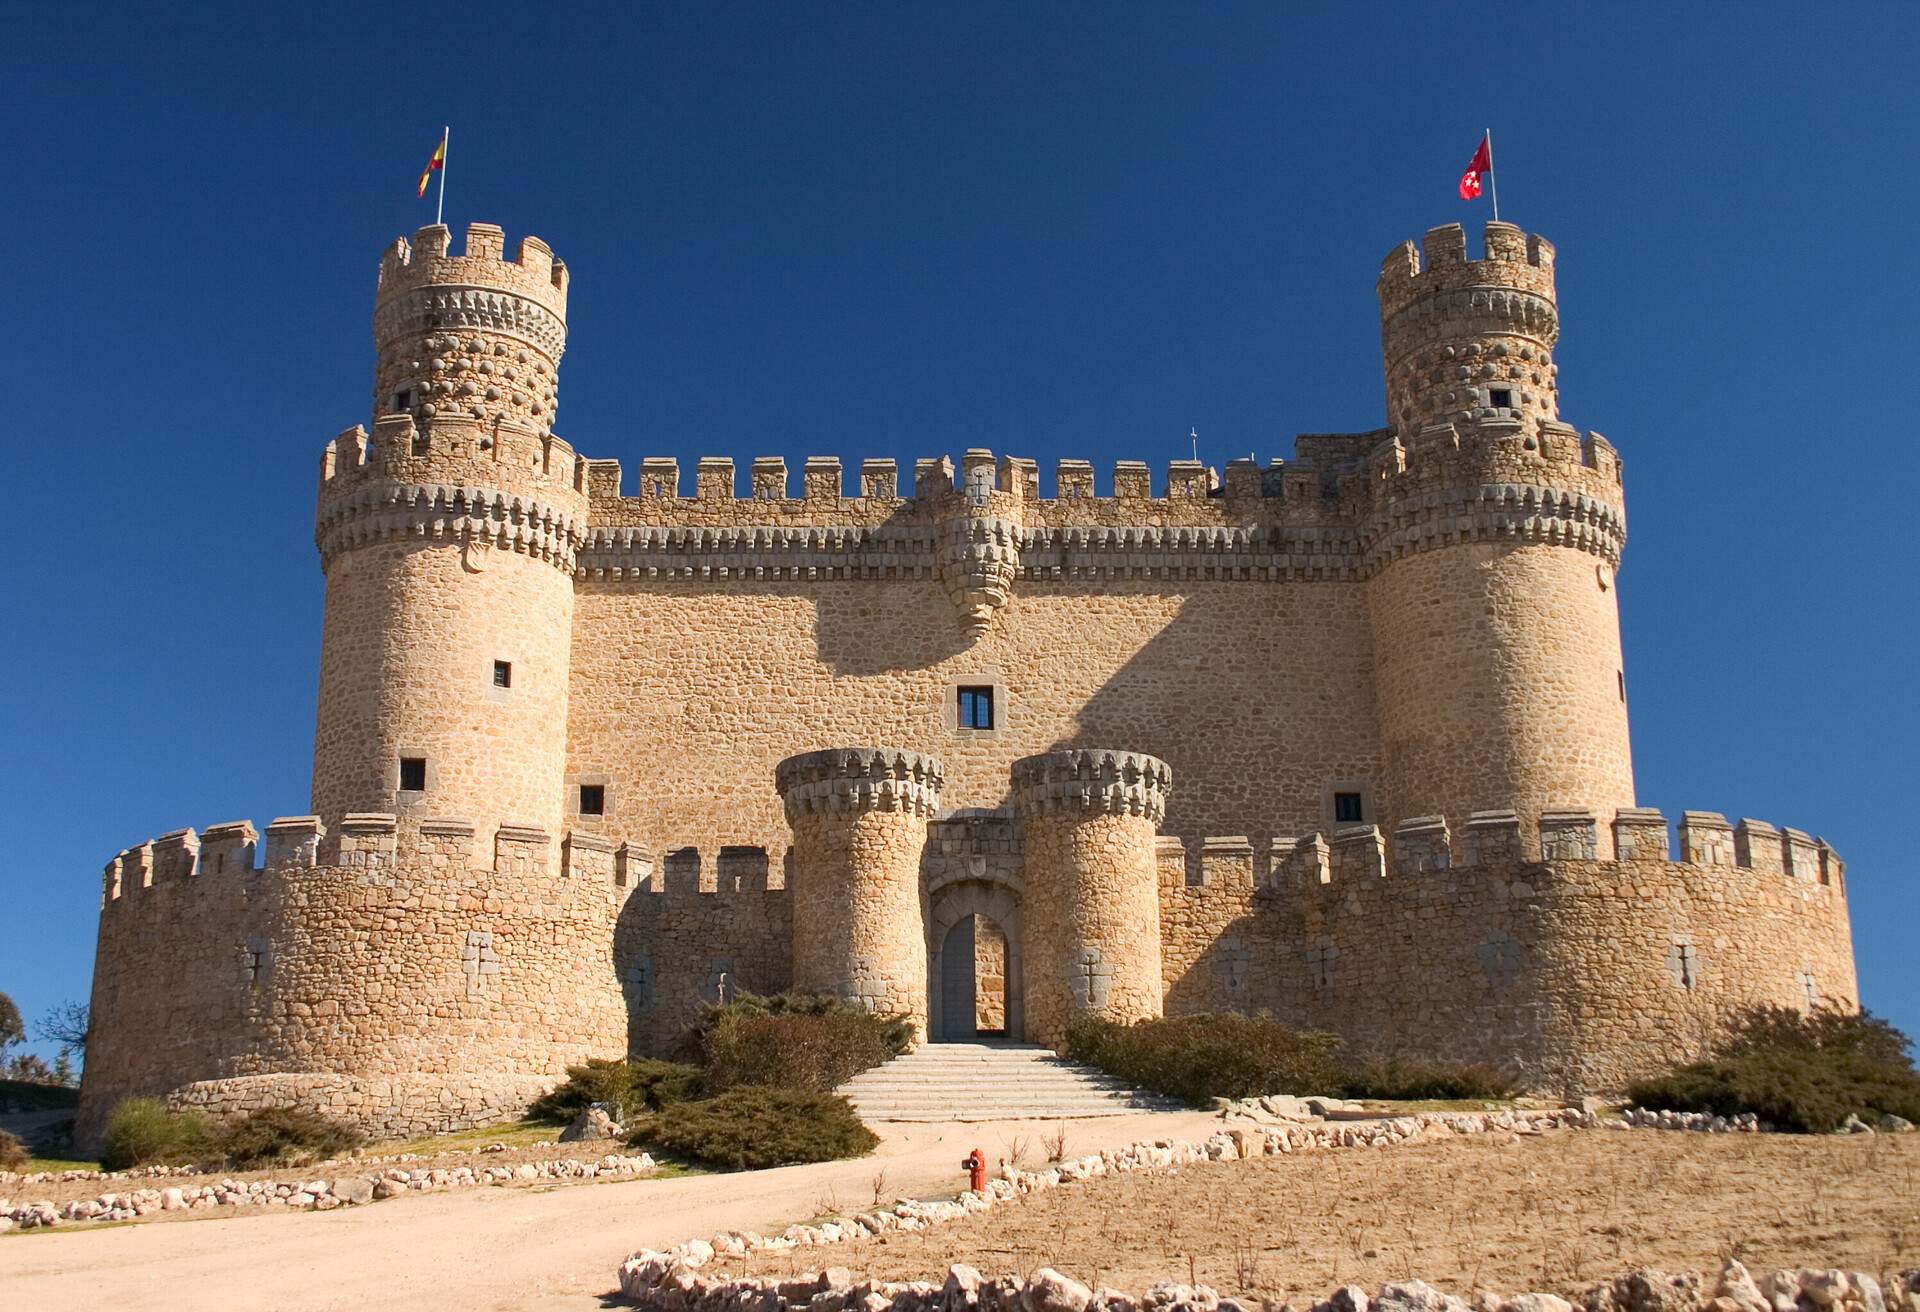 Entrance to the Manzanares's Castle in Madrid, Spain.